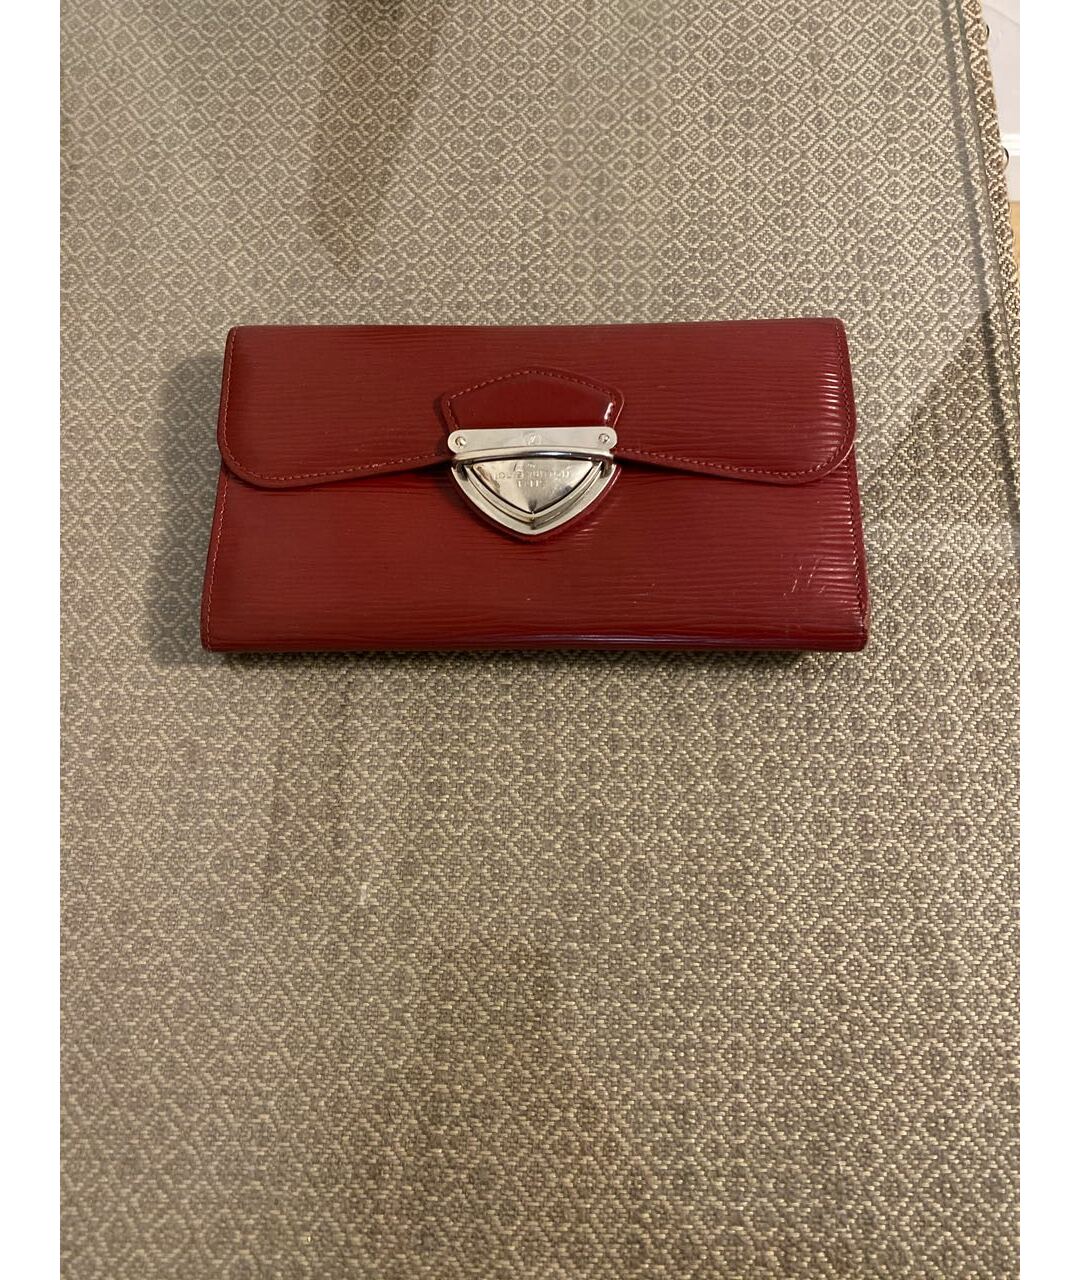 LOUIS VUITTON PRE-OWNED Бордовый кошелек, фото 7